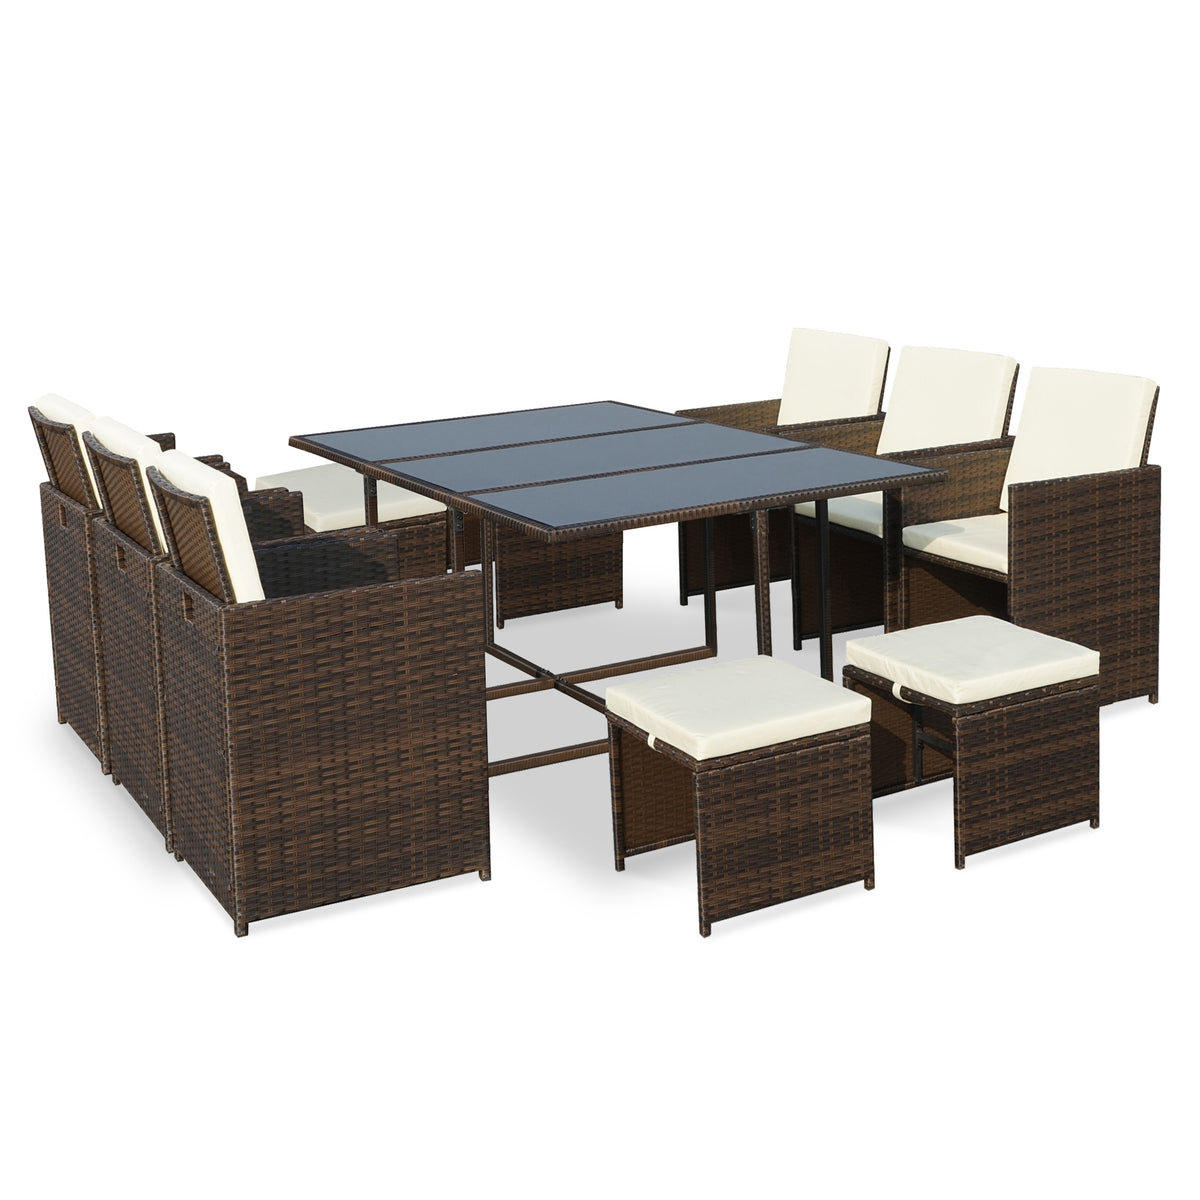 Cannes Brown 10 Seater Rattan Cube Dining Set from Roseland Furniture